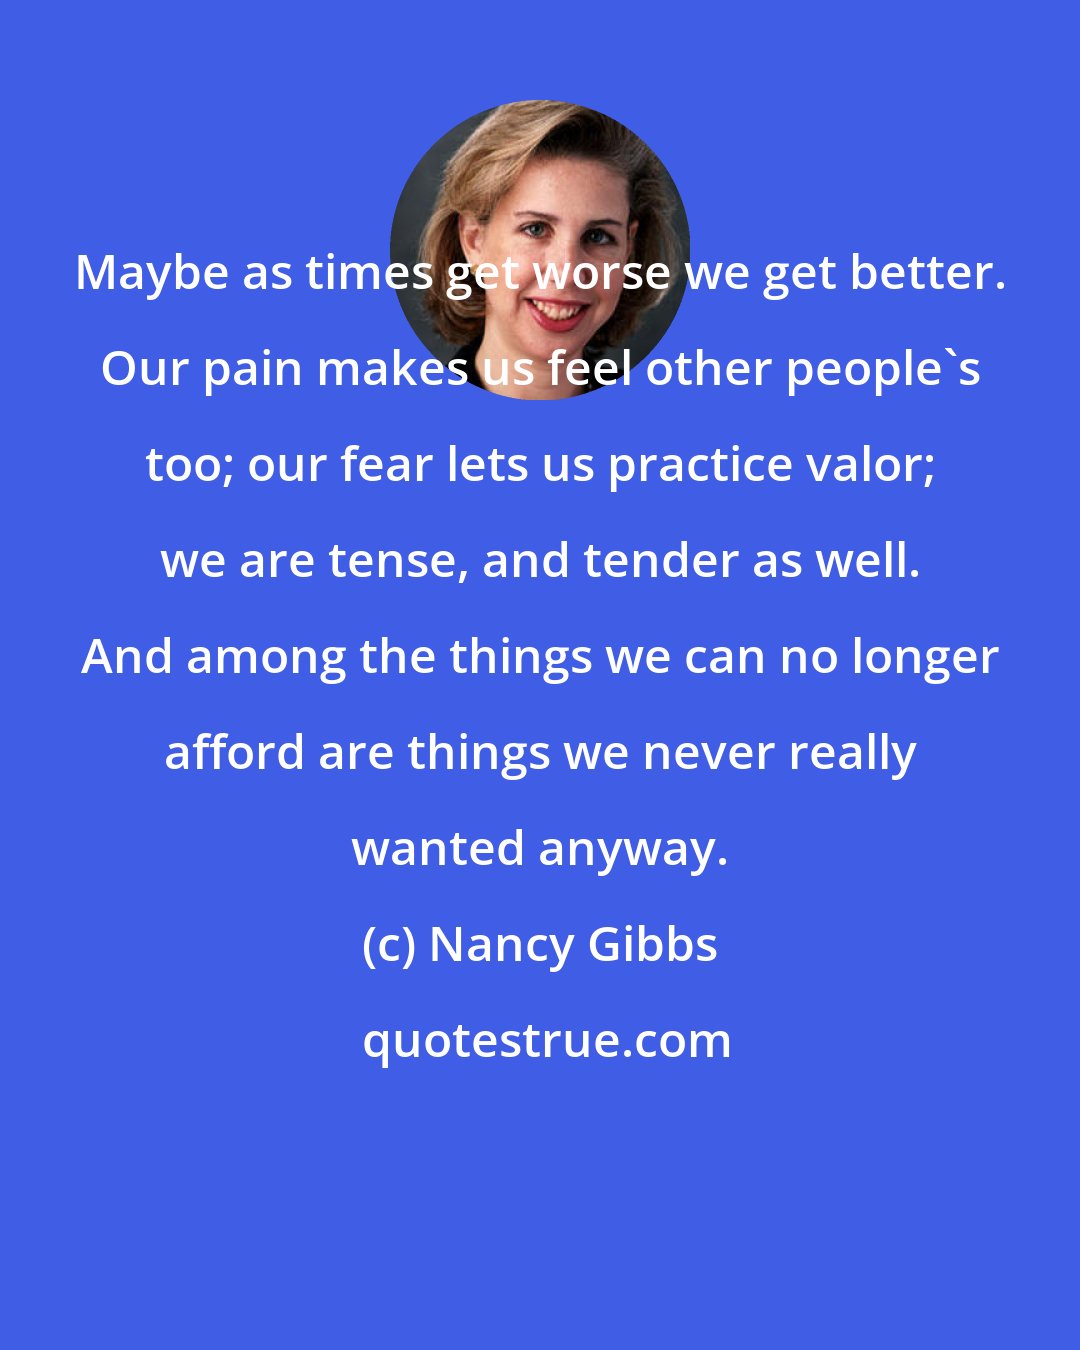 Nancy Gibbs: Maybe as times get worse we get better. Our pain makes us feel other people's too; our fear lets us practice valor; we are tense, and tender as well. And among the things we can no longer afford are things we never really wanted anyway.